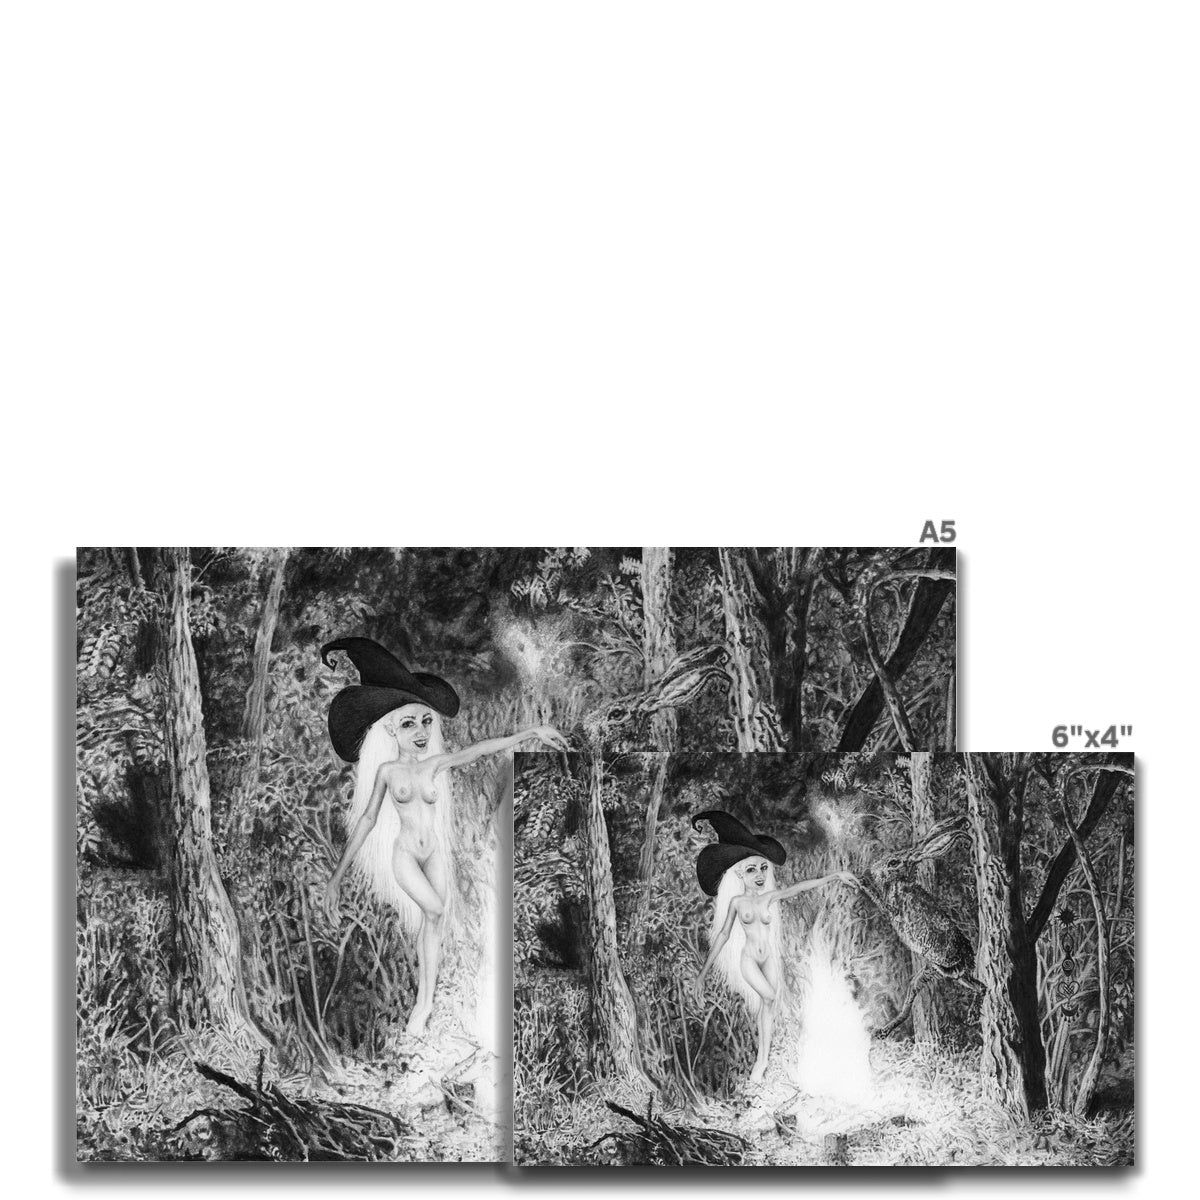 Photo showing size variations A4, 6"x 4" available for 'Forever Forest' taken from Kathryn Mason's original naked witch and hare ritual pencil drawing